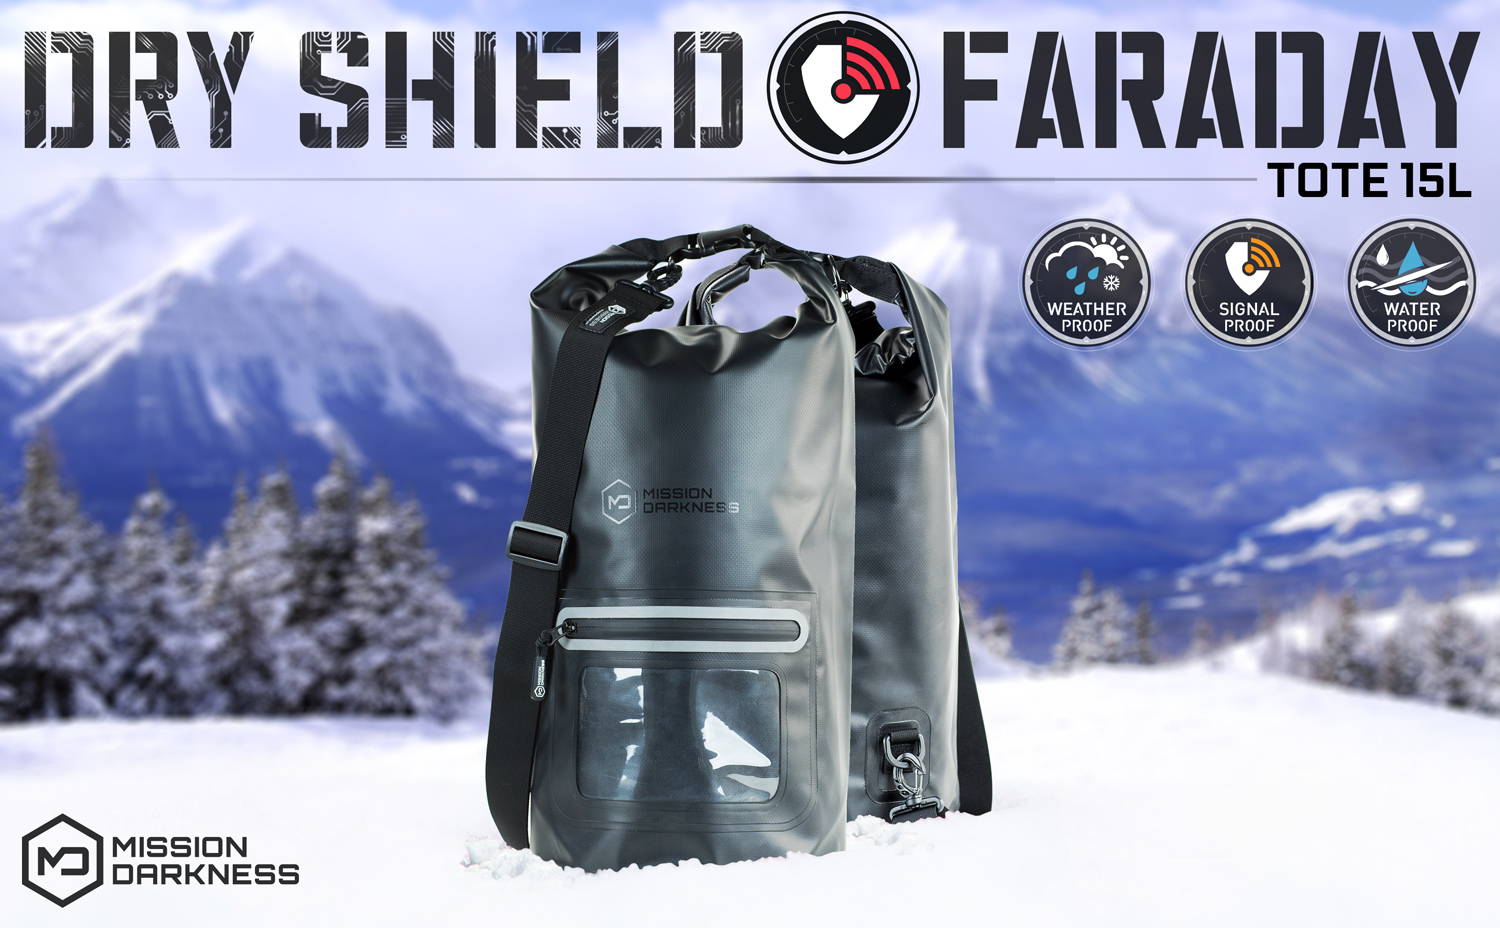 Mission darkness dry shield faraday tote bag 15 liter capacity shields electronics from radio frequency signals